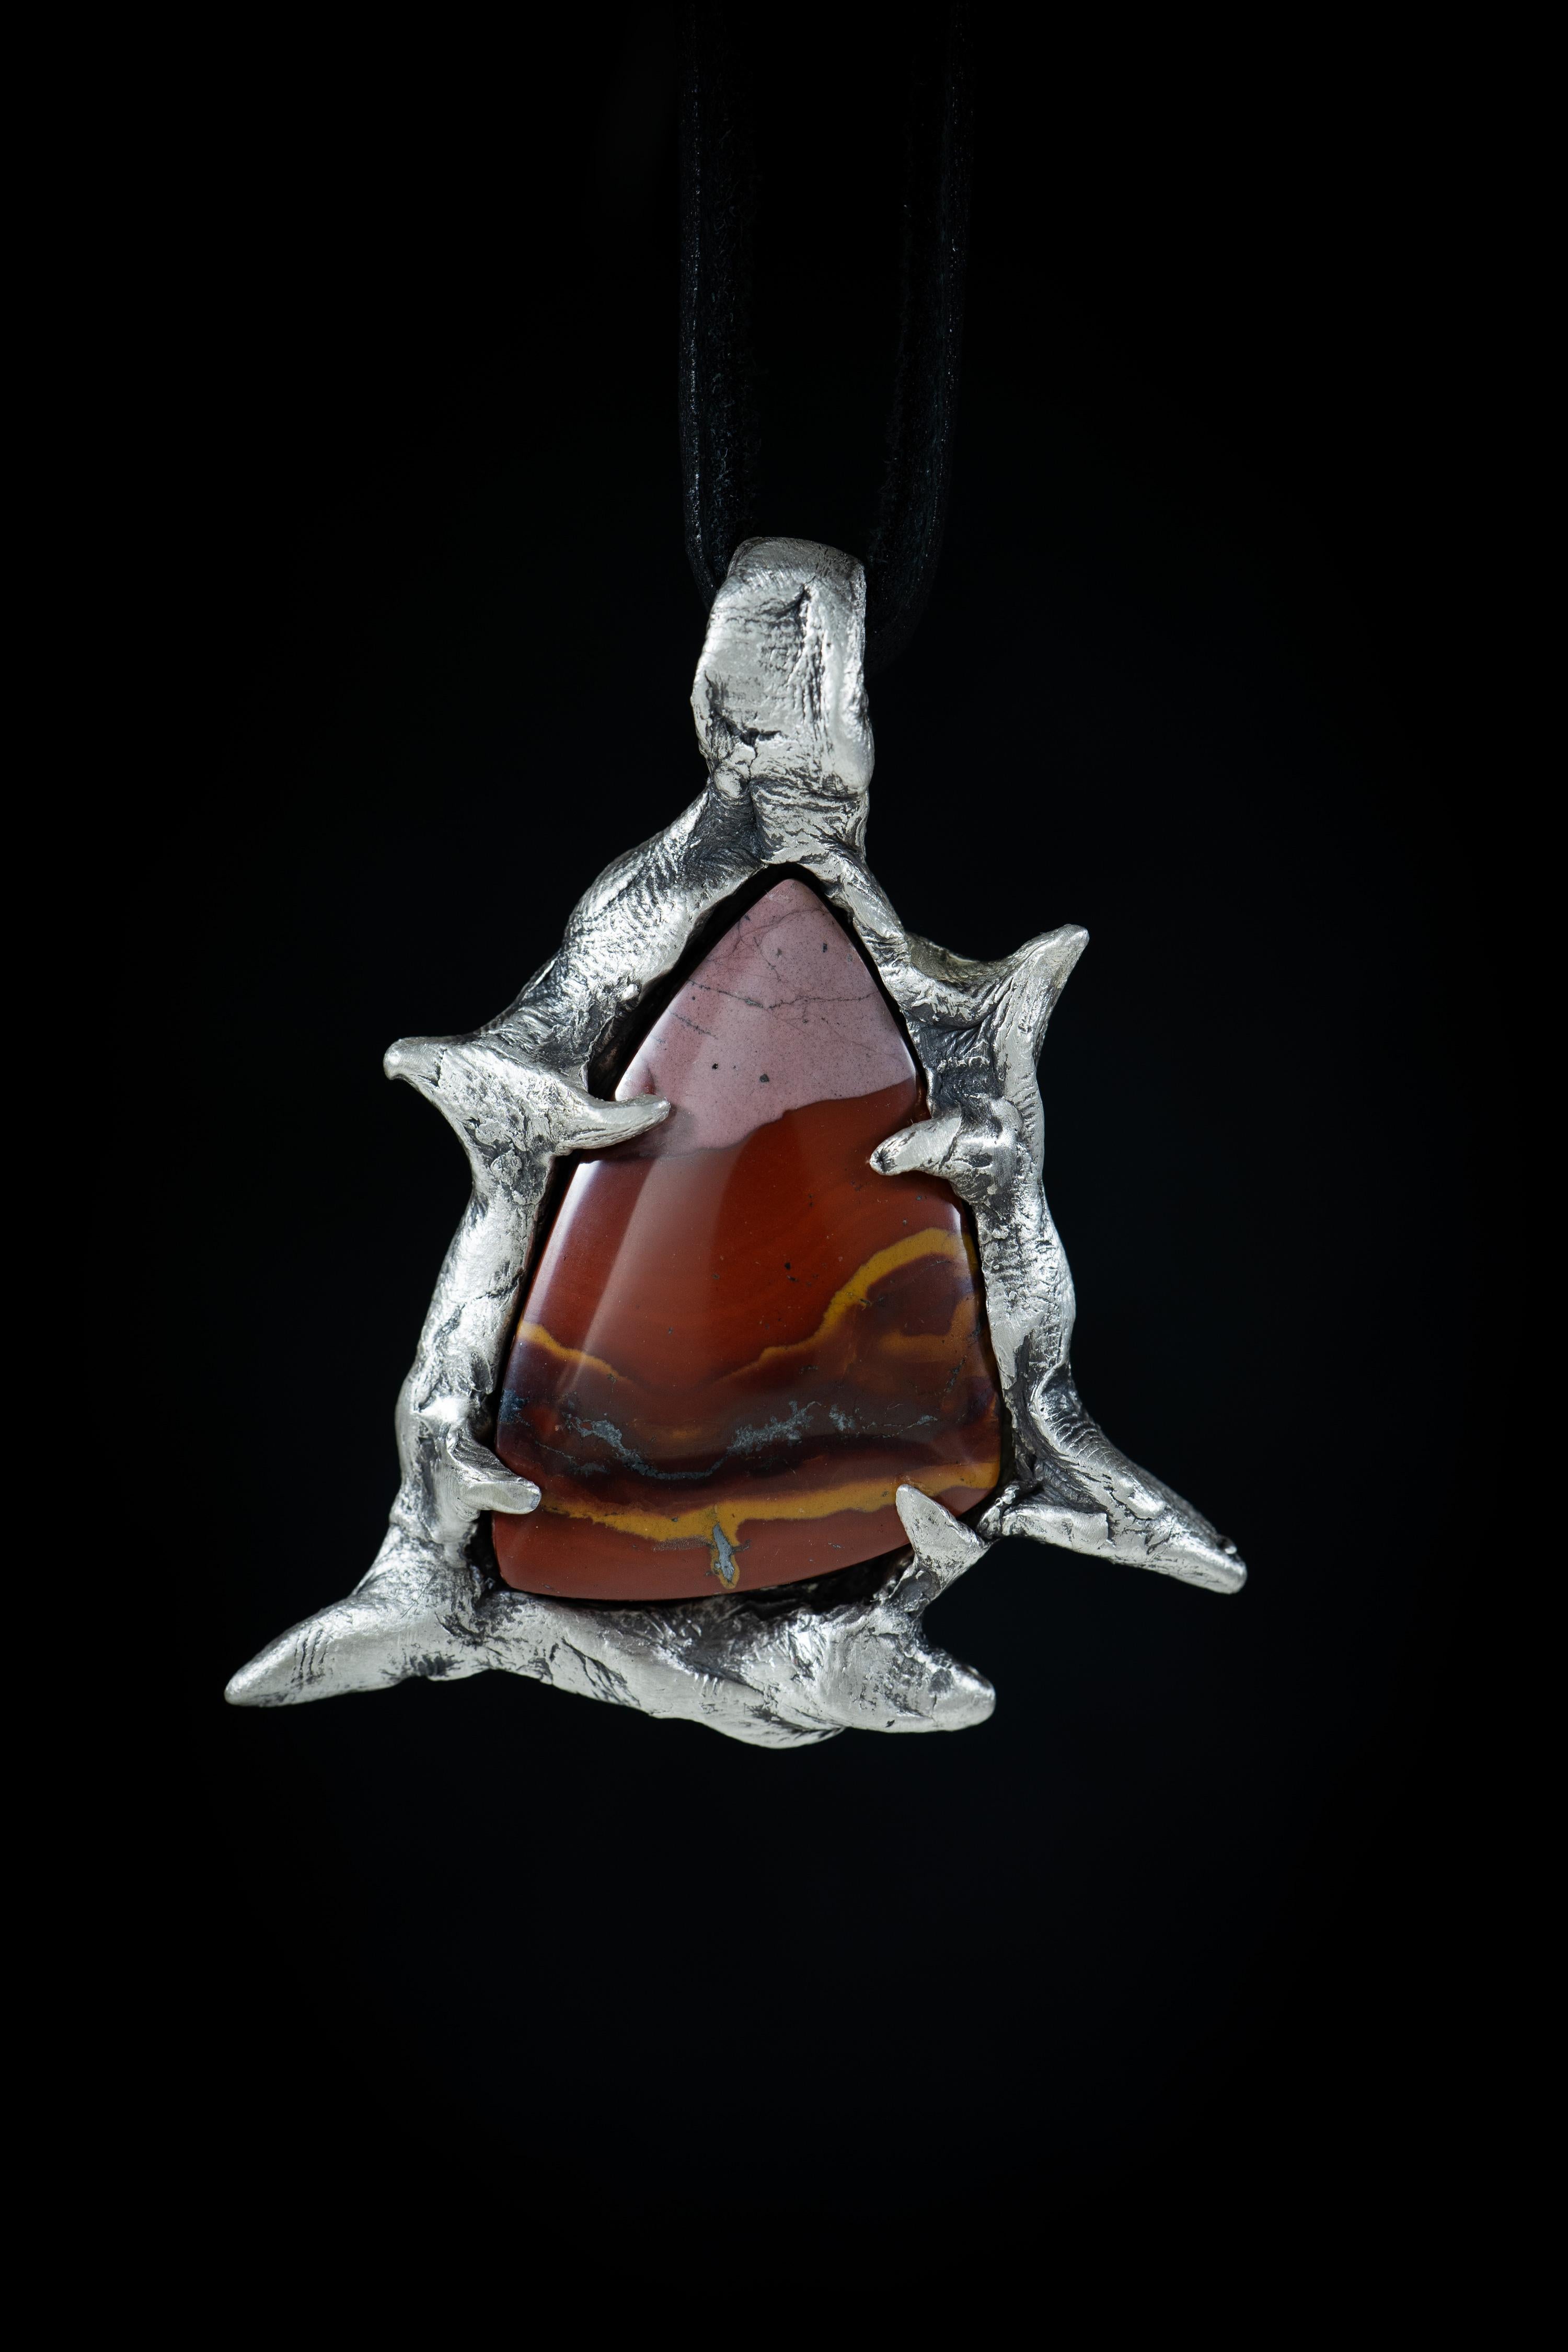 Canyon and the Star is a one-of-a-kind pendant by Ken Fury that is hand-carved and cast in sterling silver and features a natural Red & Green Blanket Jasper from Peru.

Size of piece: 58mm x 50mm

Hand-signed

Includes a leather cord, send a message